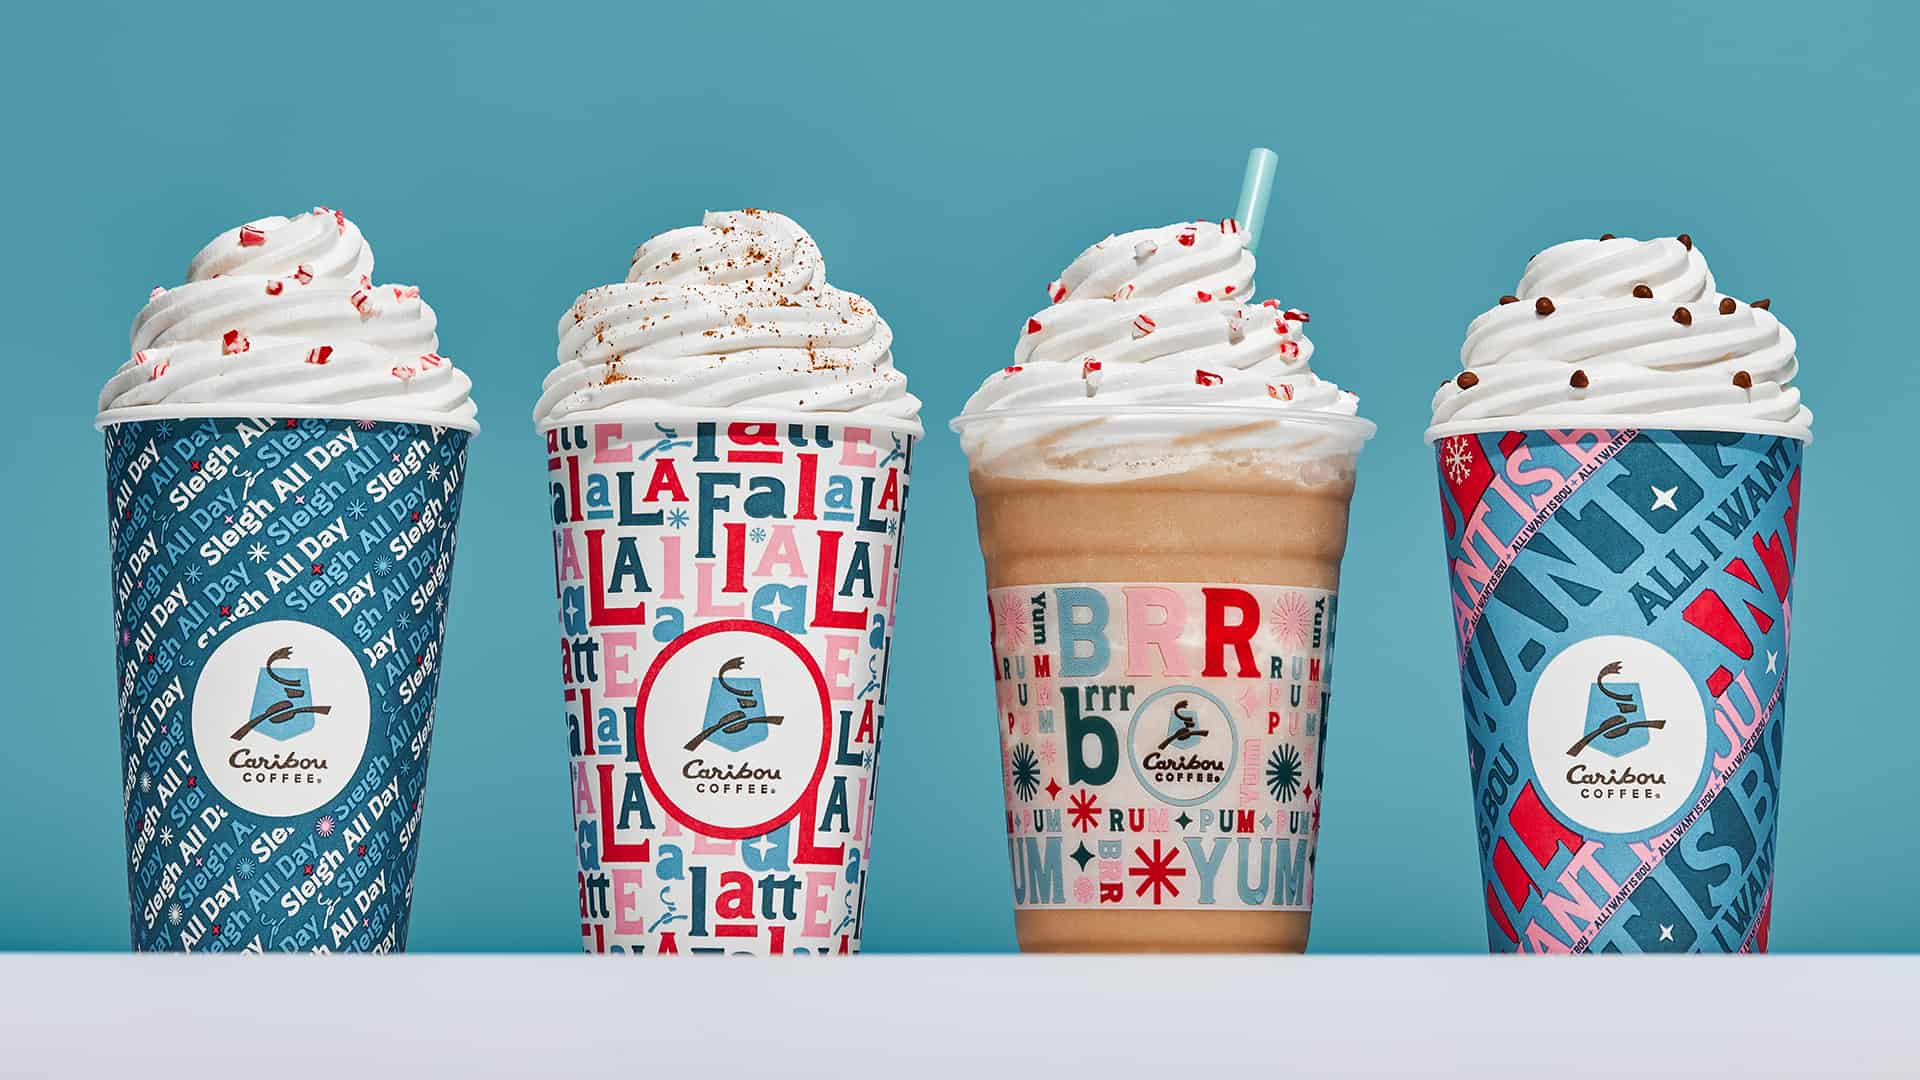 Caribou Coffee rings in the holiday season with early menu reveal and introduces limited-time Egg Nog Cold Foam